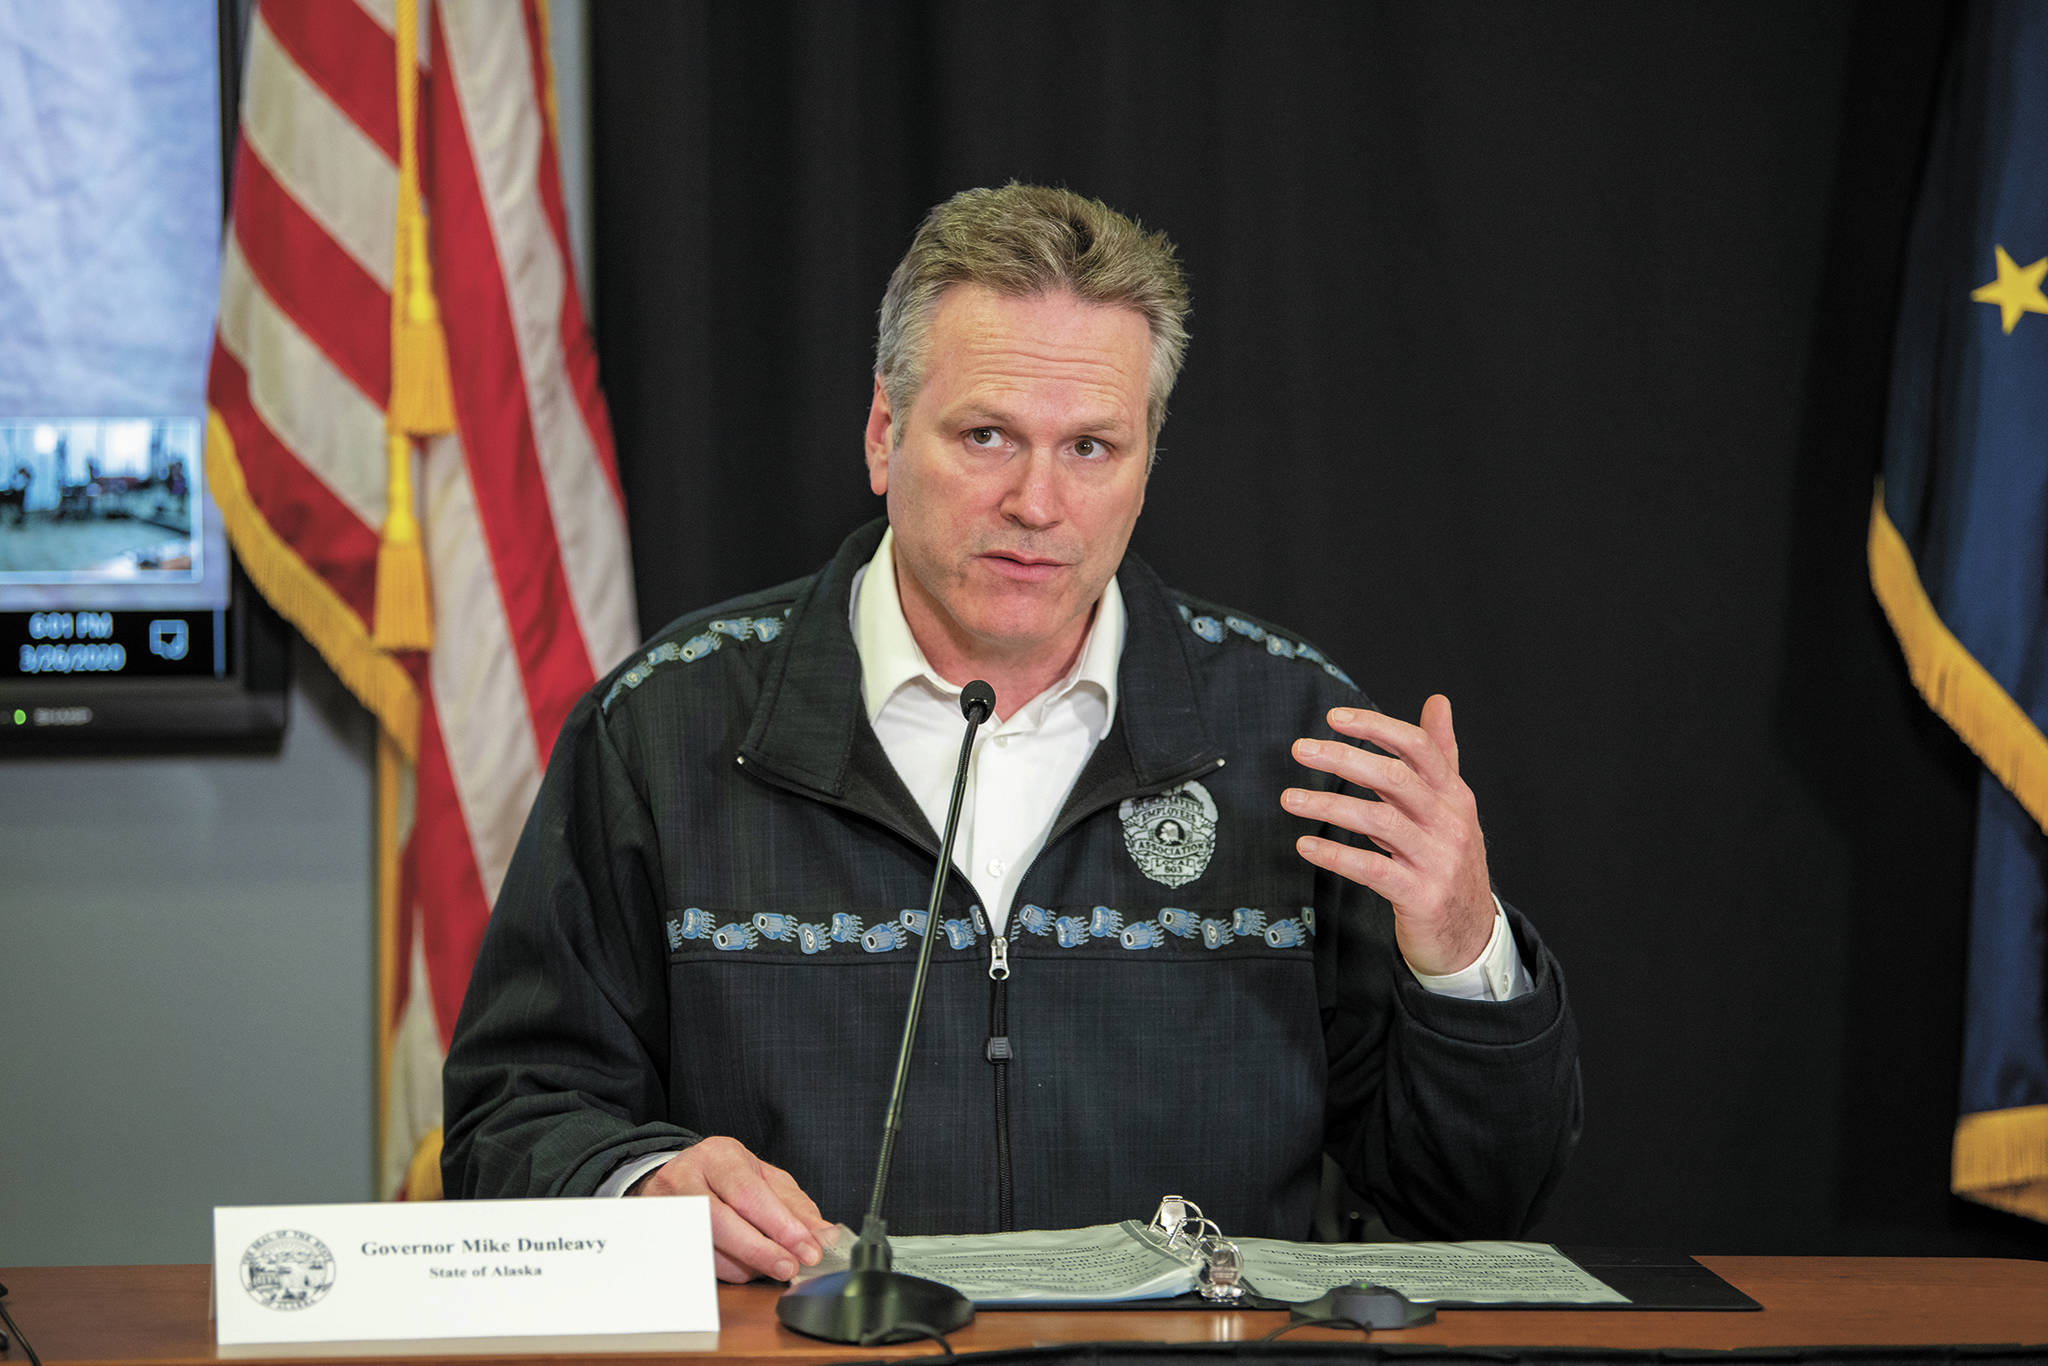 Gov. Mike Dunleavy speaks during a press conference Thursday, March 26, 2020 in the Atwood Building in Anchorage, Alaska. (Photo courtesy Office of the Governor)